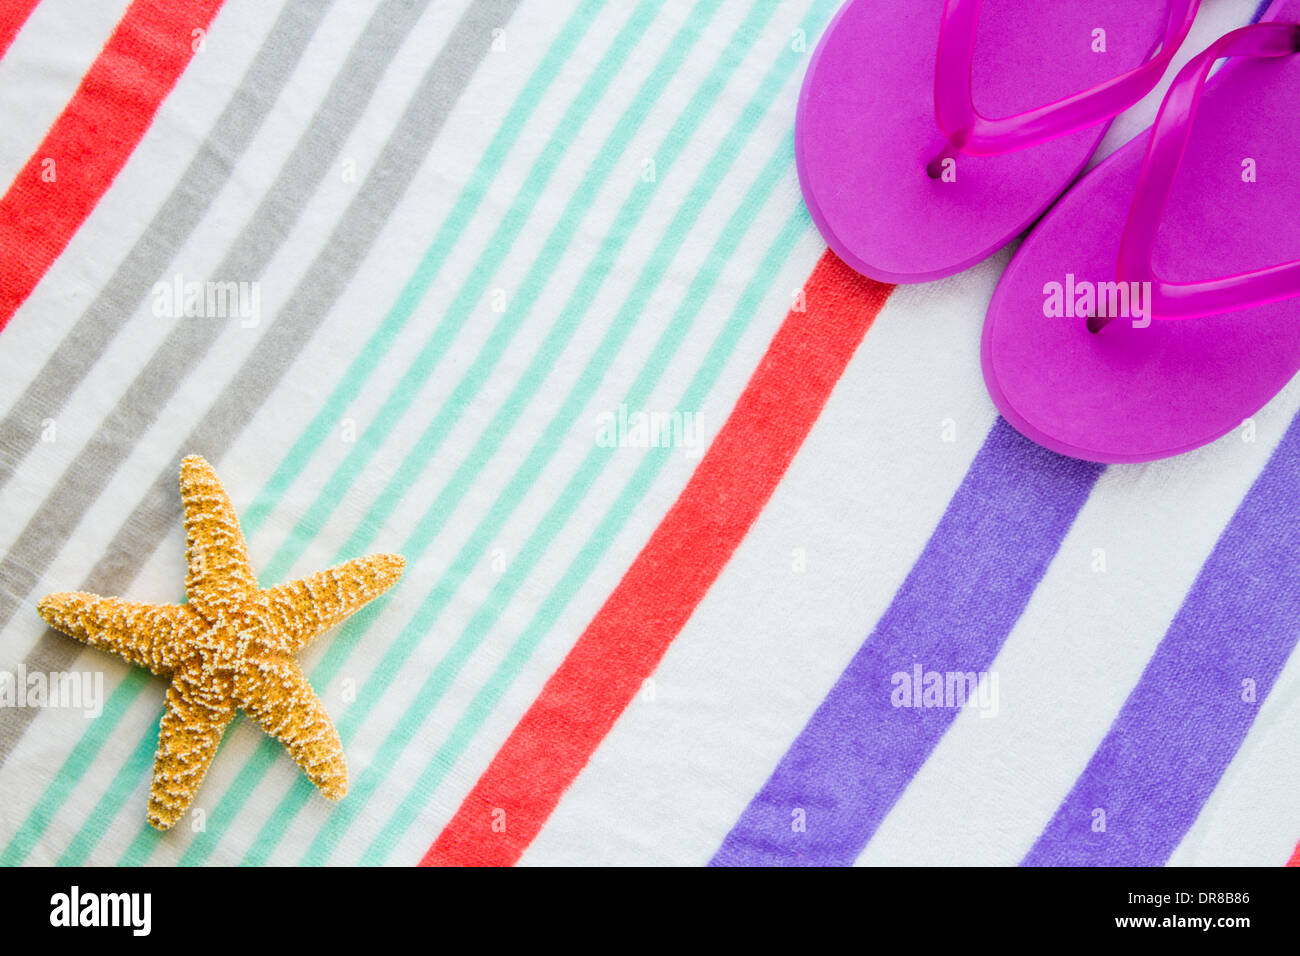 Beach scene with purple flip flops and a starfish on a striped beach towel. Stock Photo